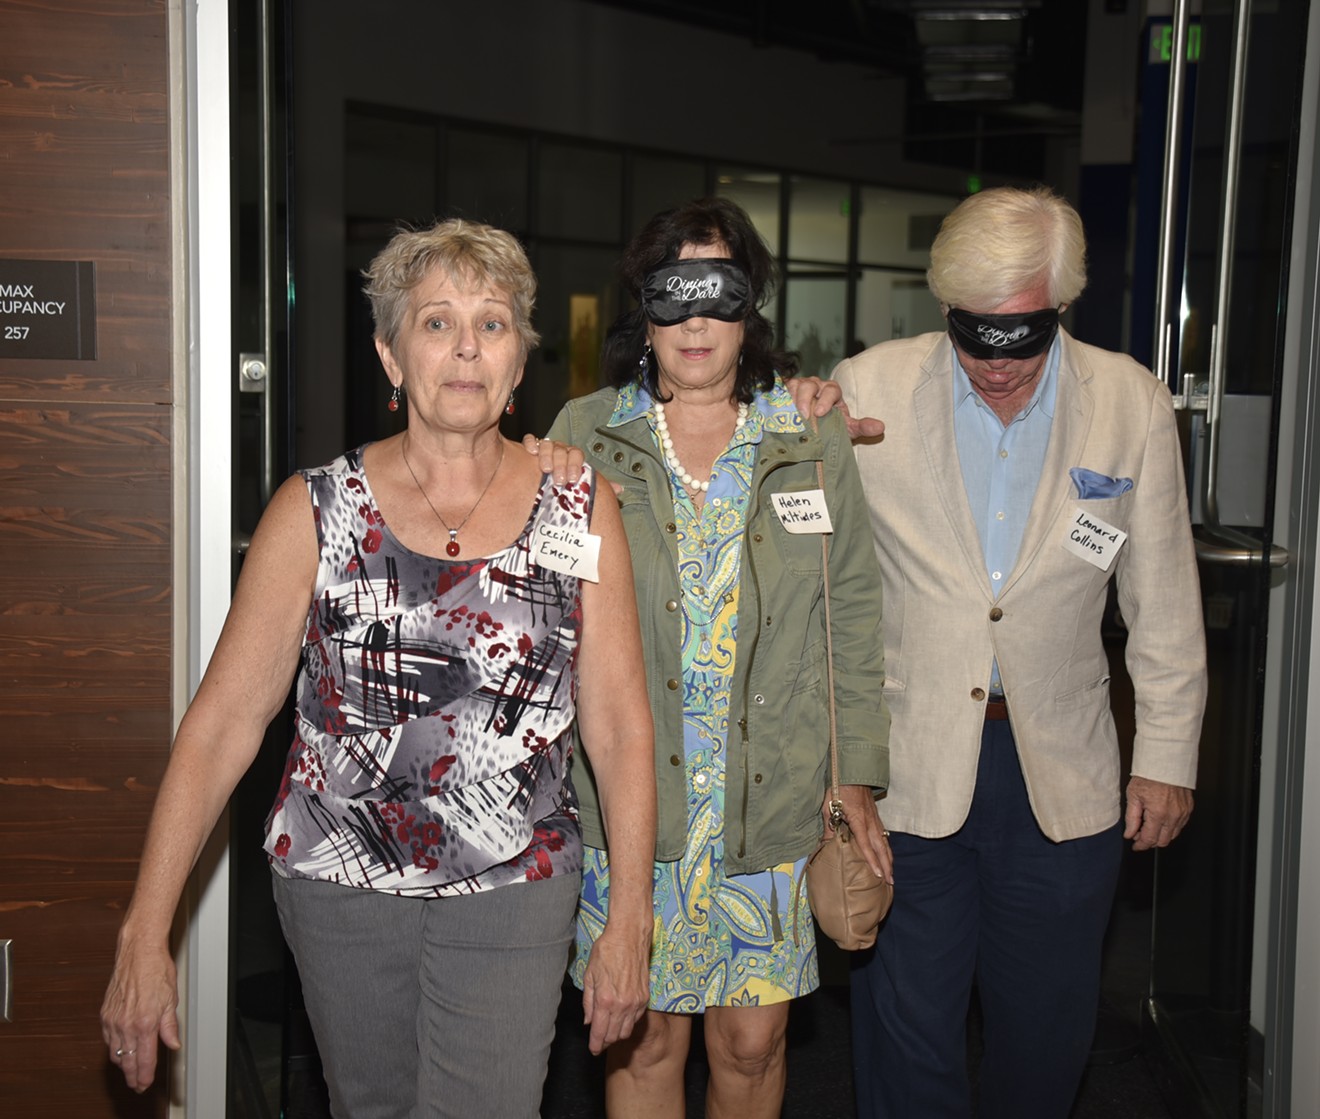 Savannah Center for Blind and Low Vision Network in the Dark